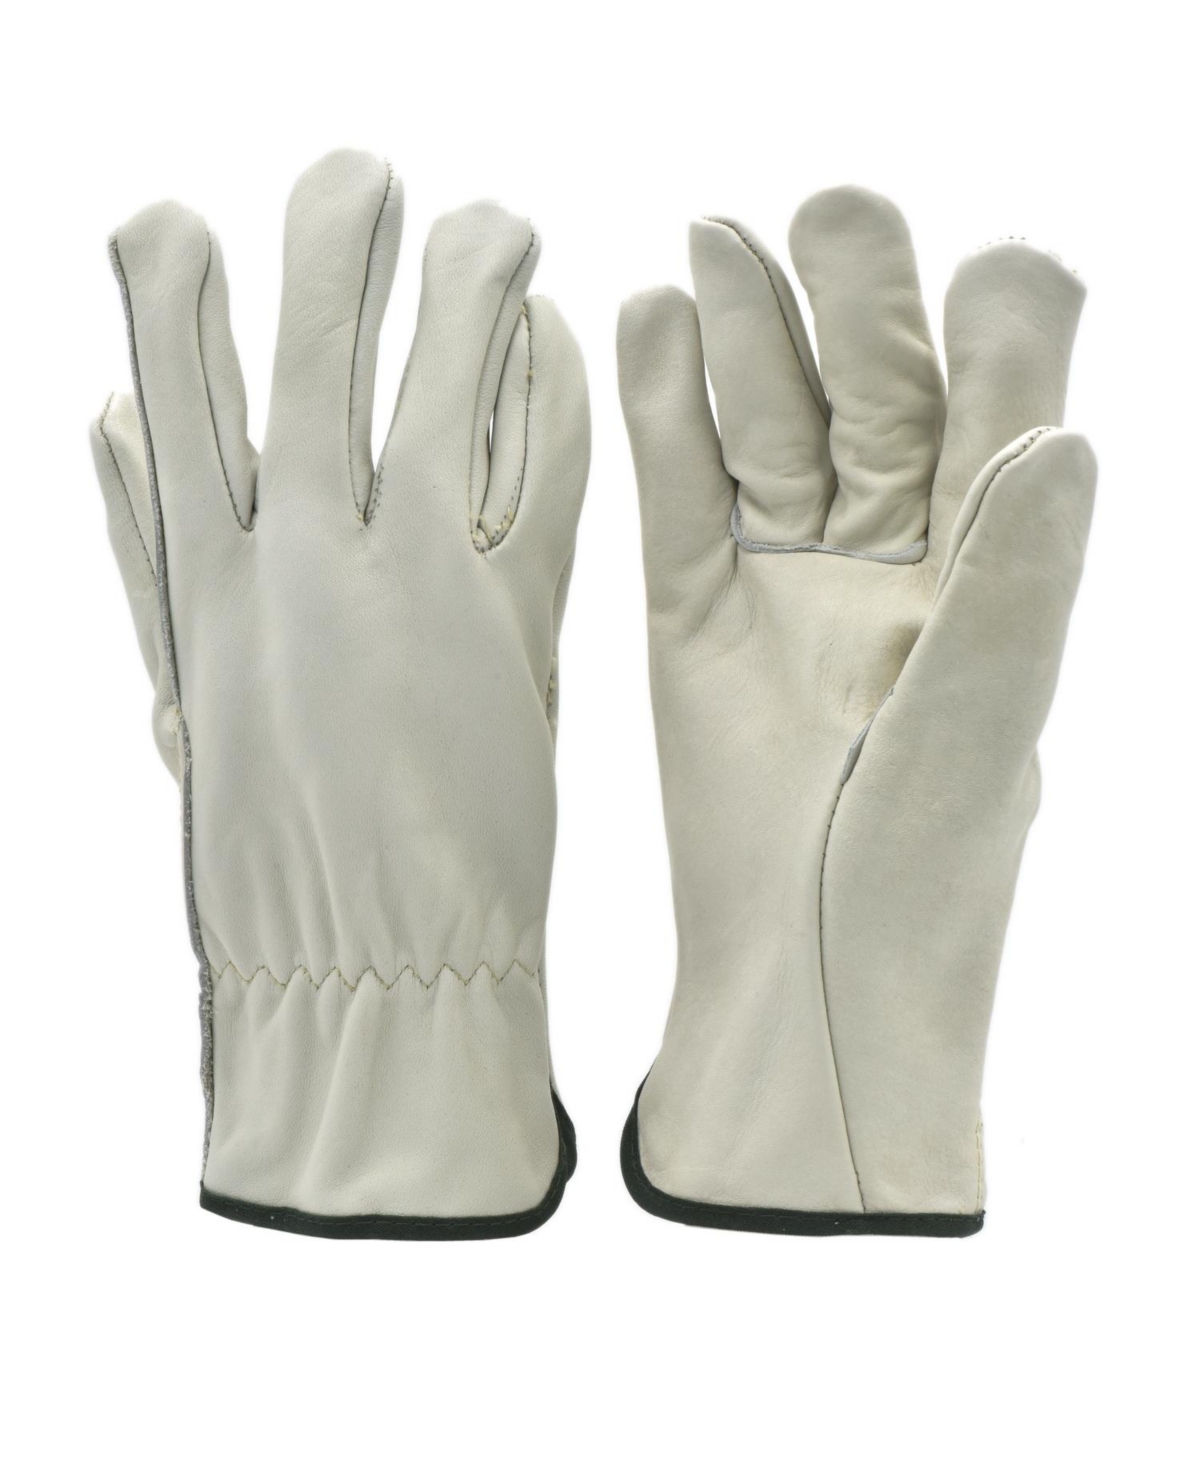 6003 Driving and Work Gloves, 3 Pairs - Natural